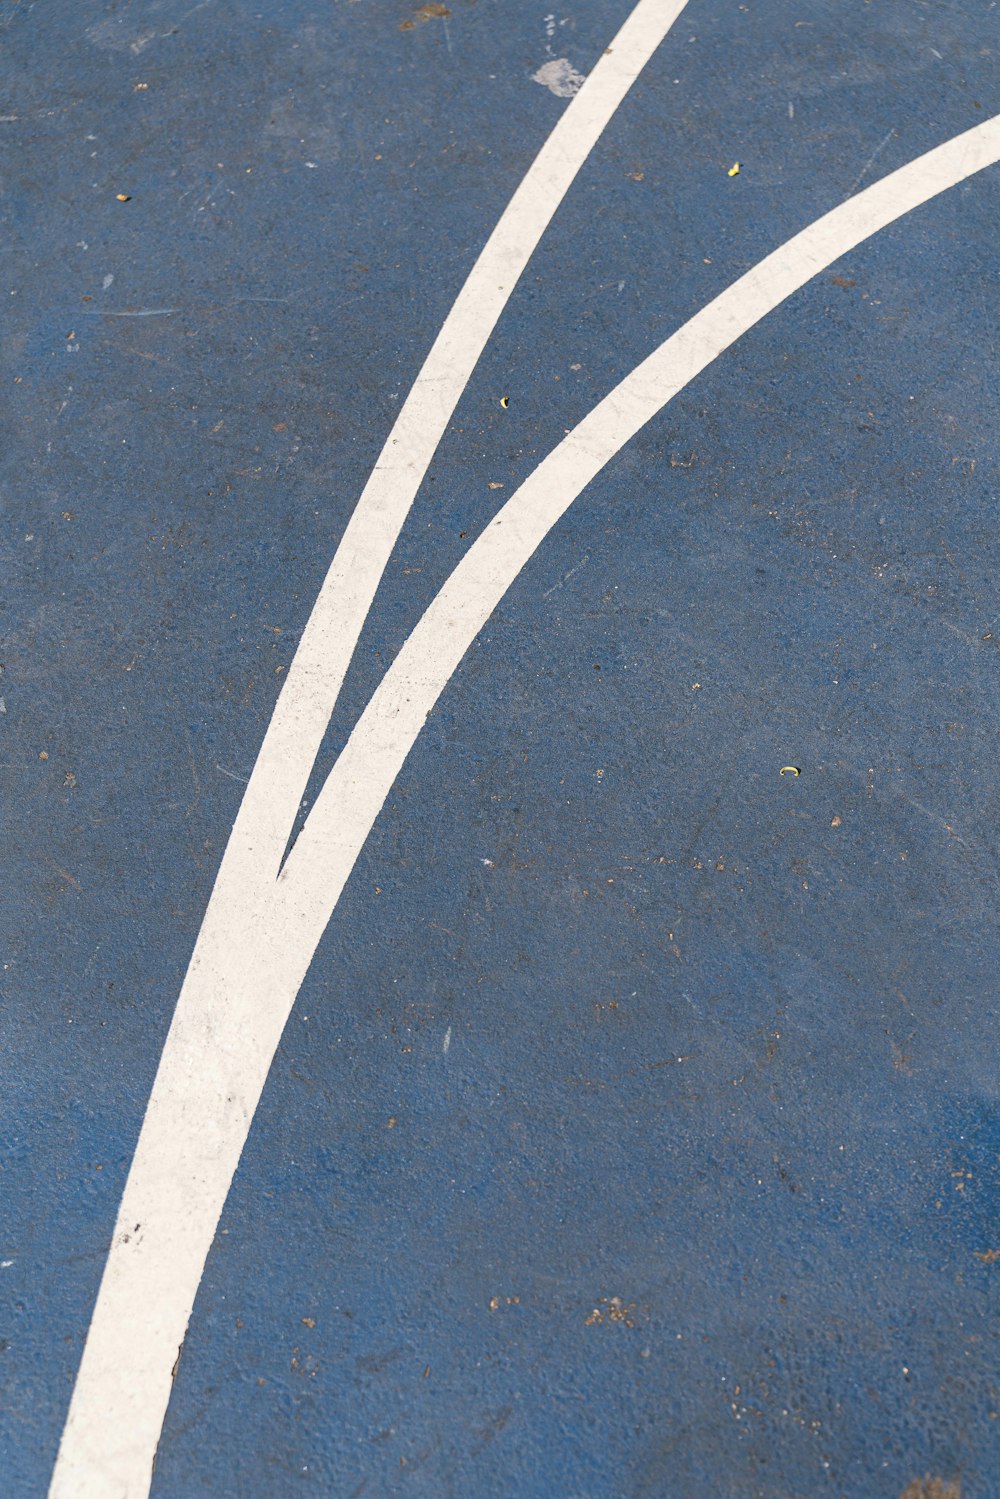 a tennis court with a white line painted on it